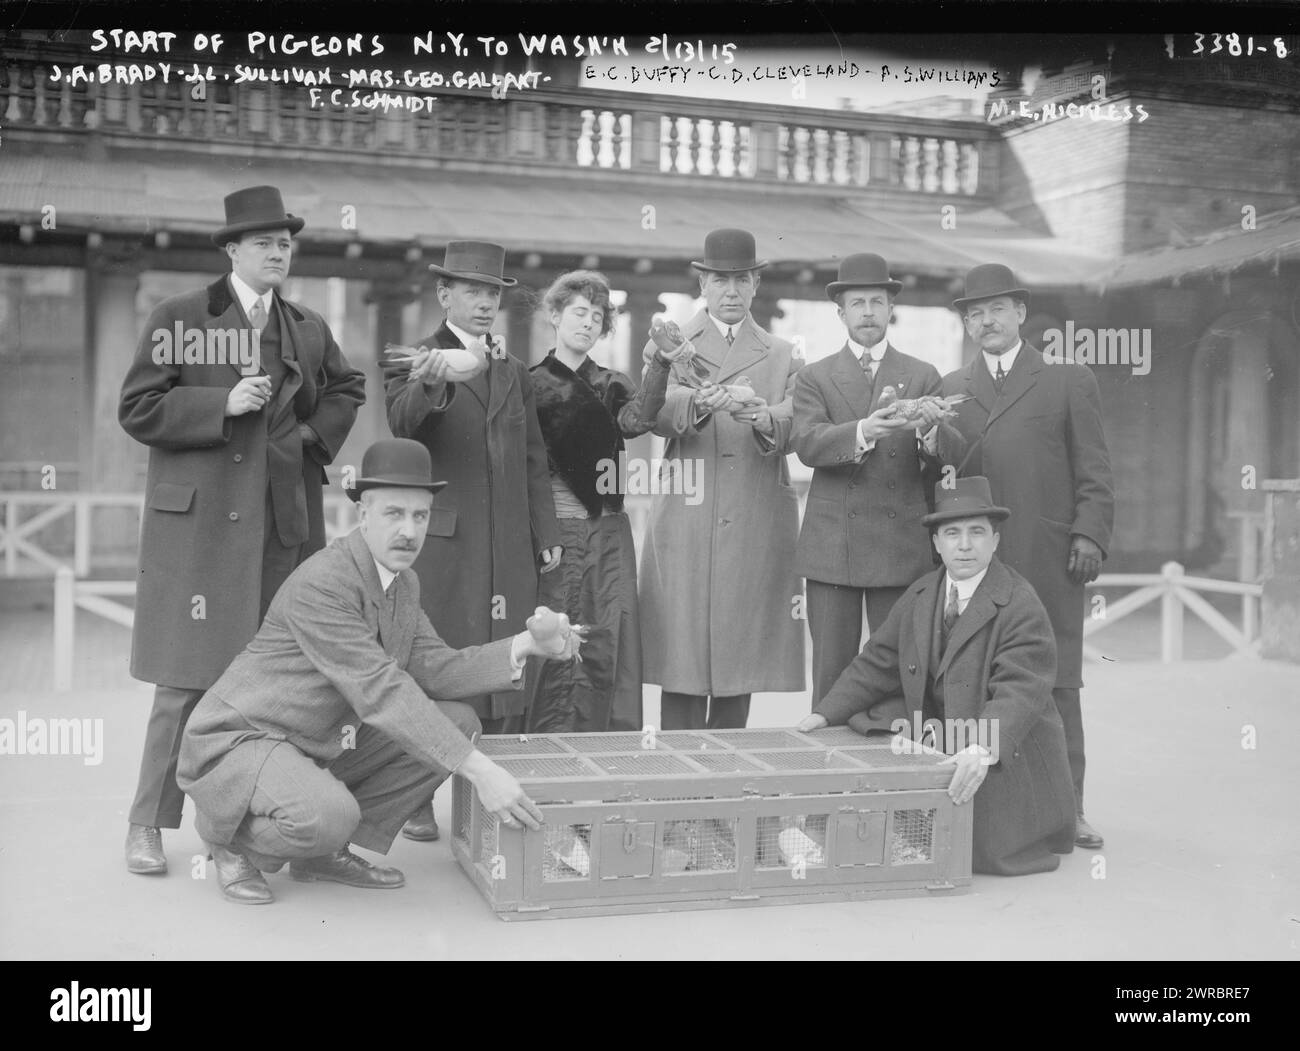 Start of pigeons N.Y. to Wash'n, 2/13/15, - J.A. Brady, J.L. Sullivan, Mrs. Geo. Gallant, F. Fred C. Schmidt, E.C. Duffy, C.D. Cleveland, A.S. Williams, M.E. Hickless, Photograph shows officials of the Poultry and Pigeon Show on the roof of Madison Square Garden in New York City, preparing to release pigeons carrying peace messages for President Wilson in Washington, D.C., 1915 Feb. 13, Glass negatives, 1 negative: glass Stock Photo